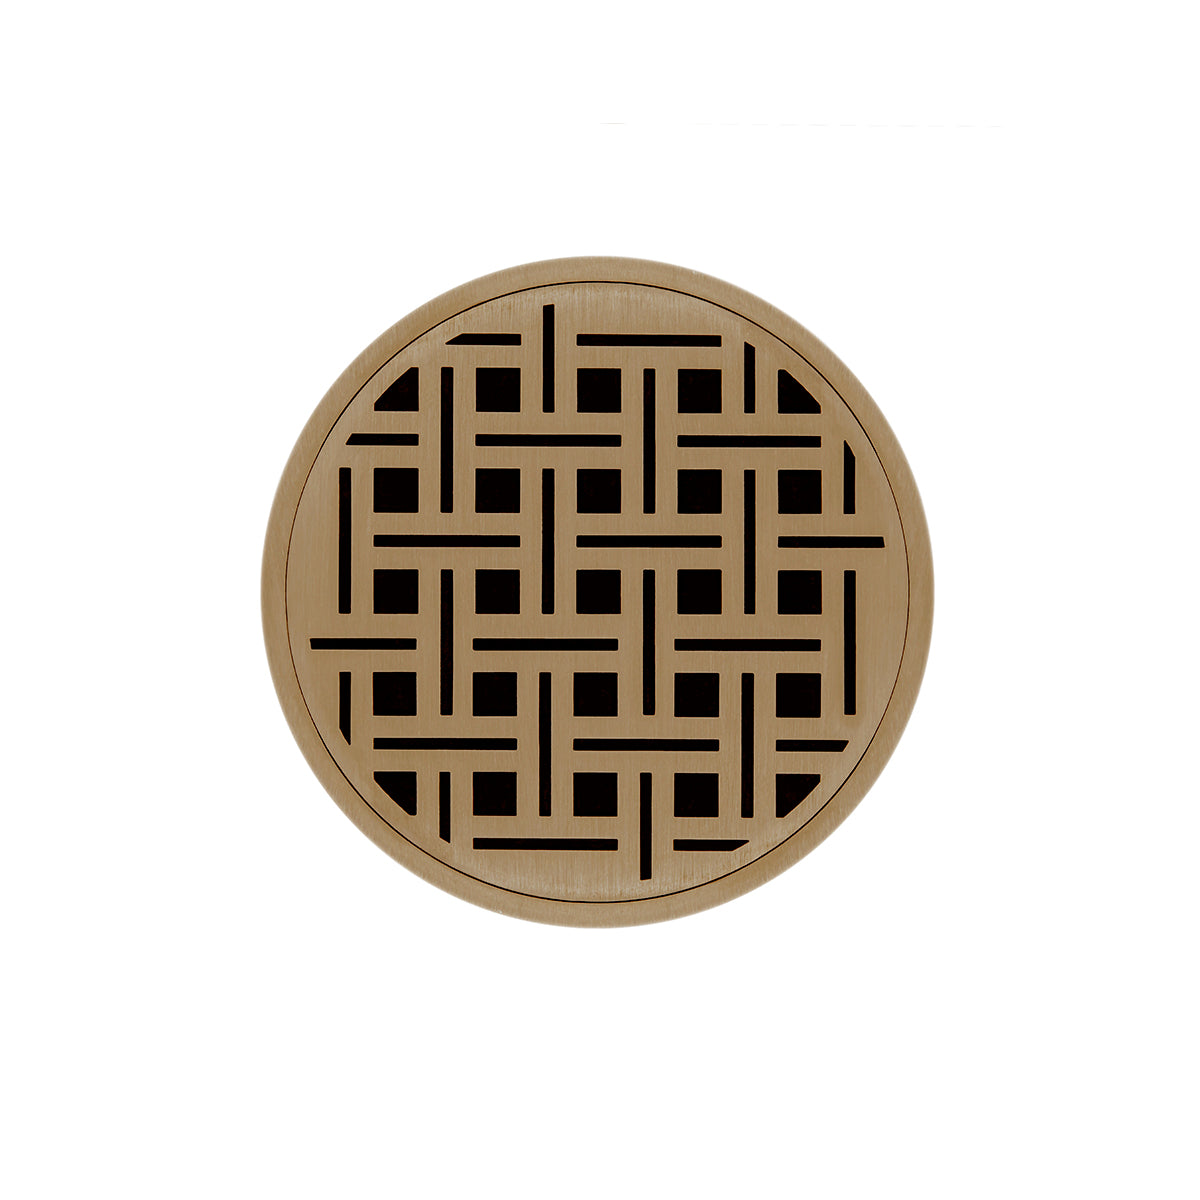 Infinity Drain 5" Round RVDB 5 Premium Center Drain Kit with Weave Pattern Decorative Plate with ABS Bonded Flange Drain Body, 2", 3" and 4" Outlet